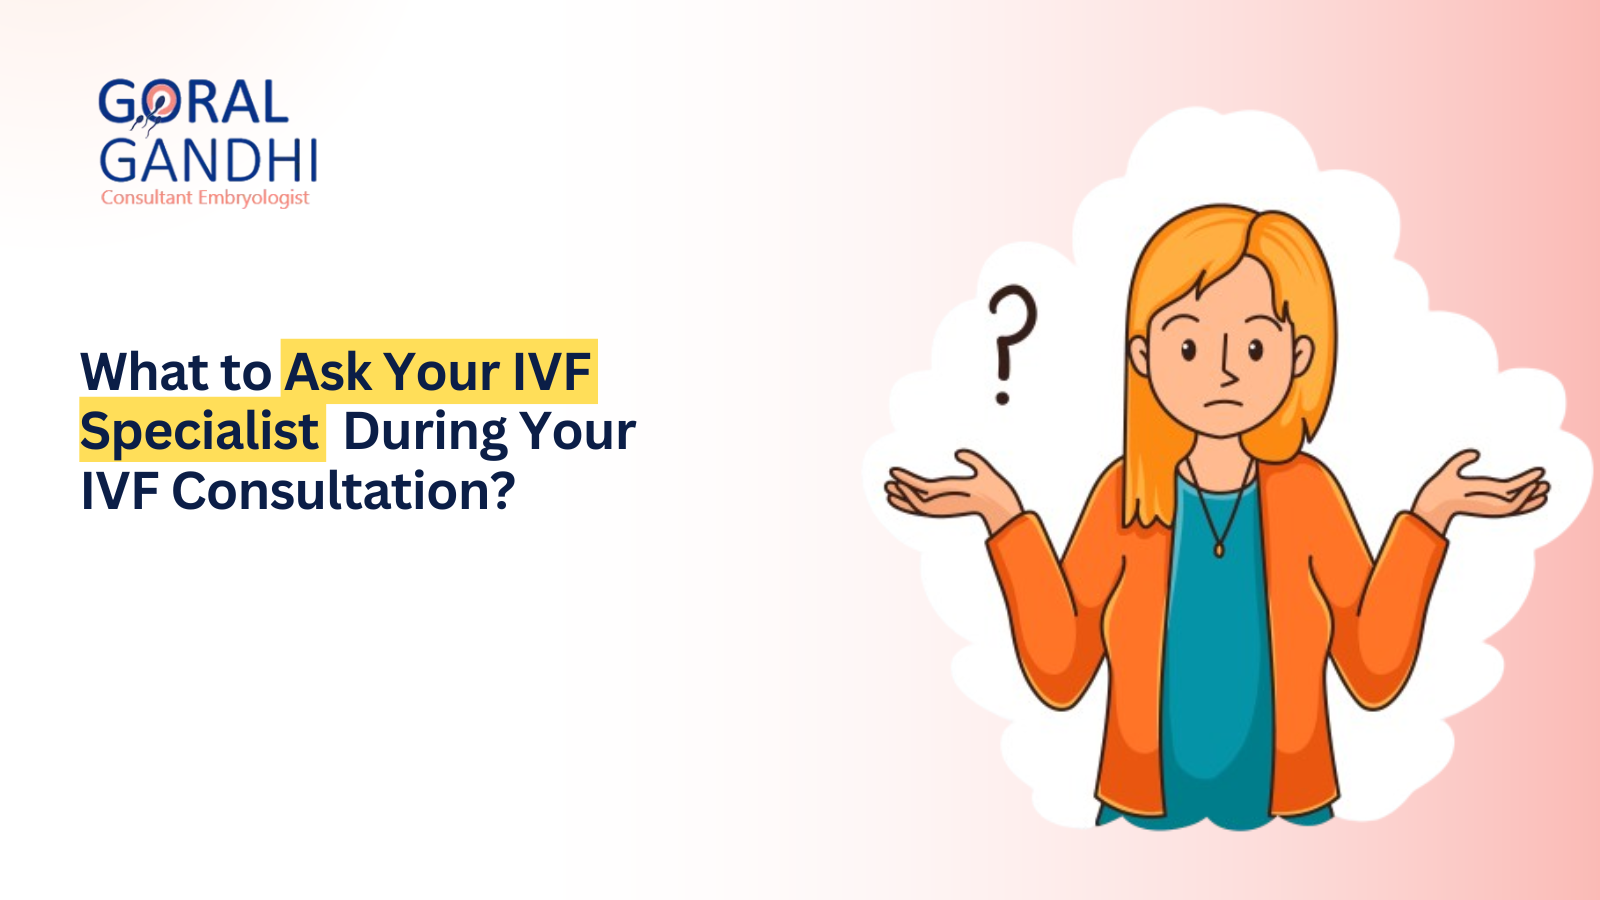 What to Ask Your IVF Specialist During Your IVF Consultation?